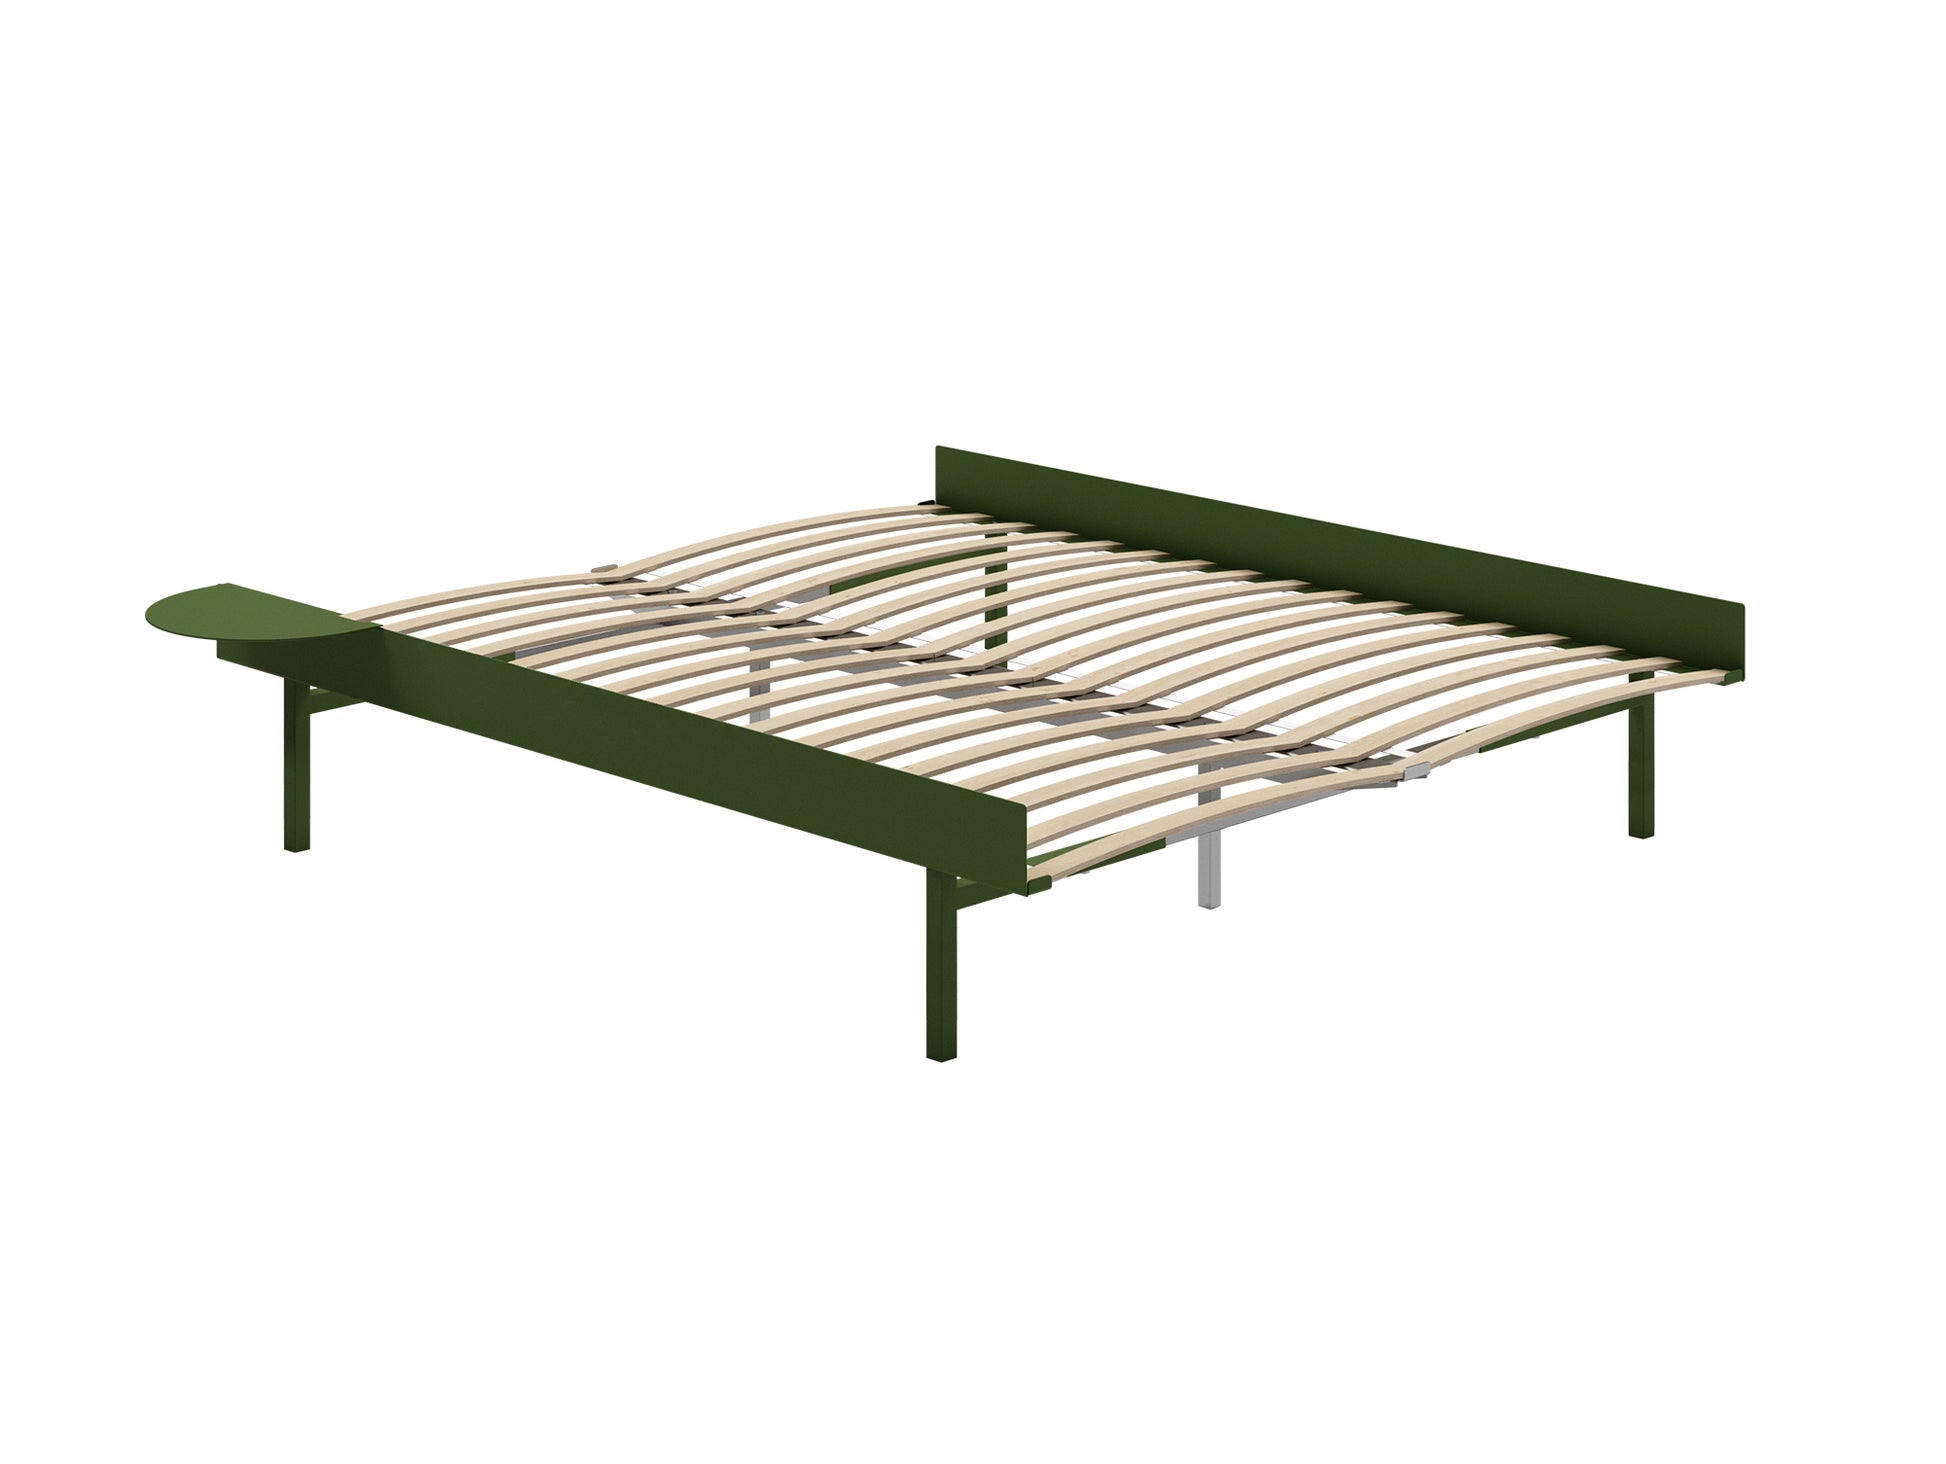 Bed 90 - 180 cm (High) by Moebe- Bed Frame / with 160cm wide Slats / 1 Side Table / Pine Green